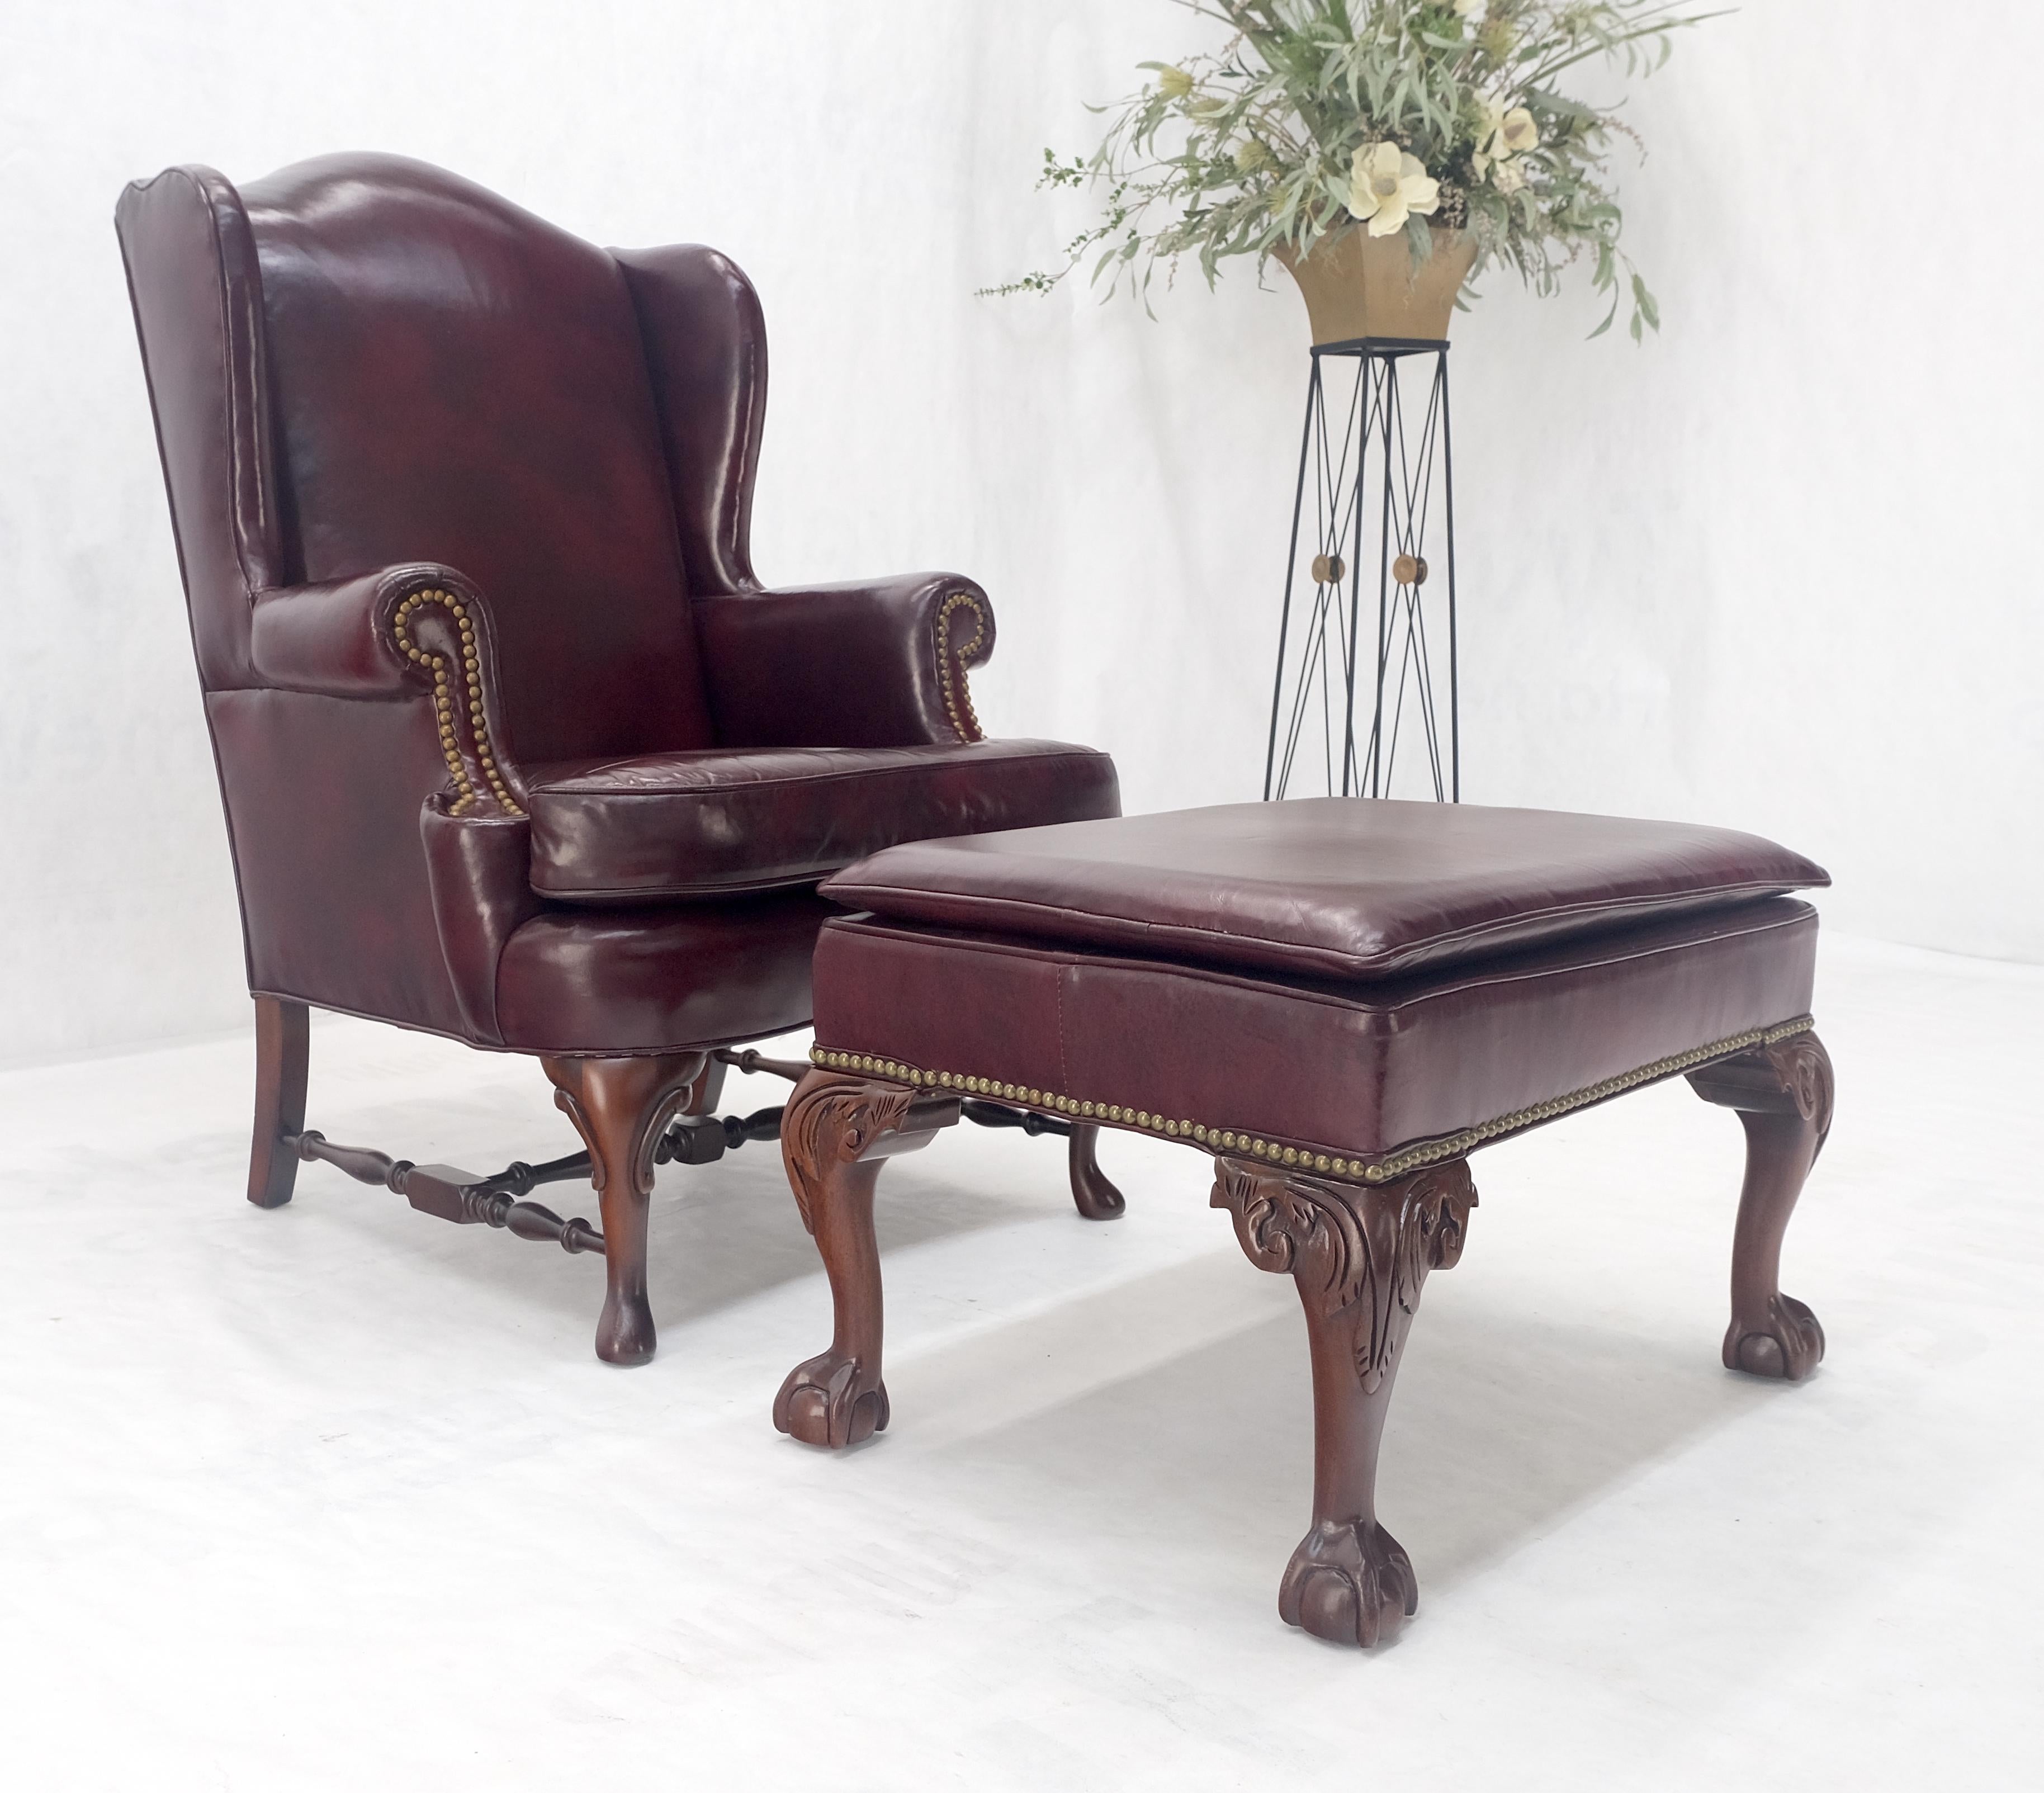 Kindel Burgundy Leather Upholstery Carved Mahogany Legs Wingback Chair & Ottoman For Sale 4